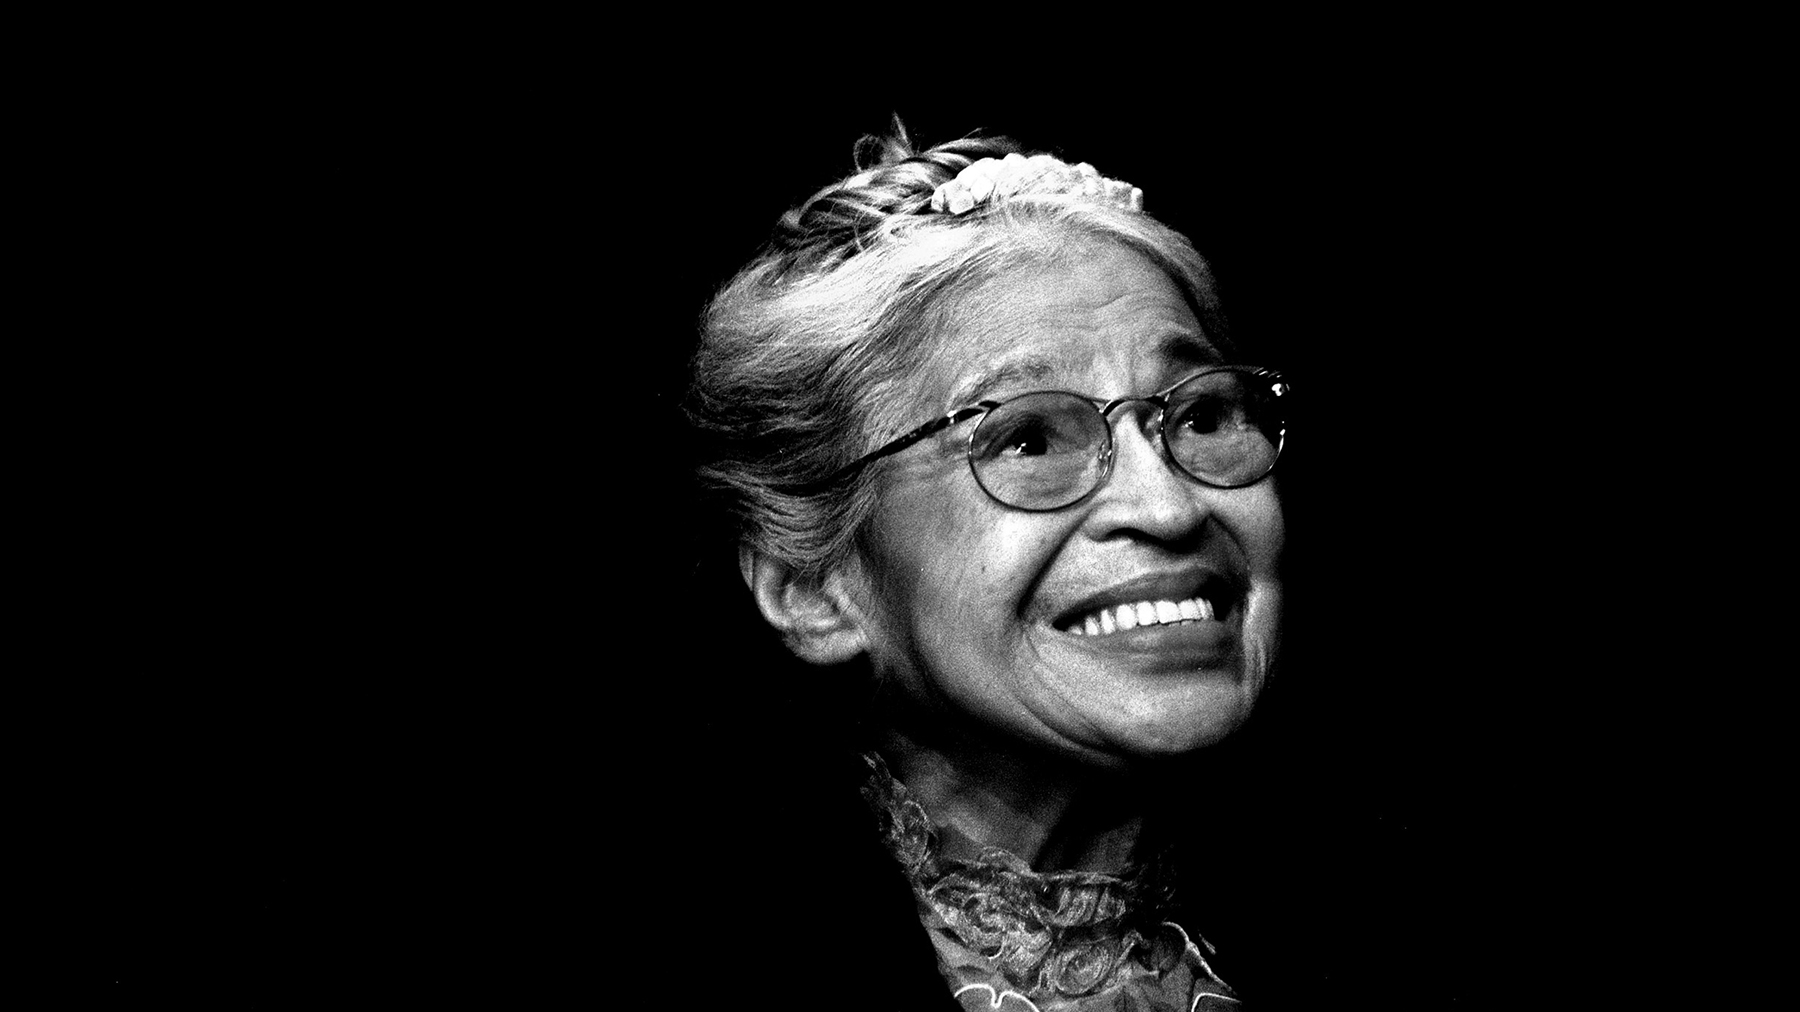 the biography of rosa parks